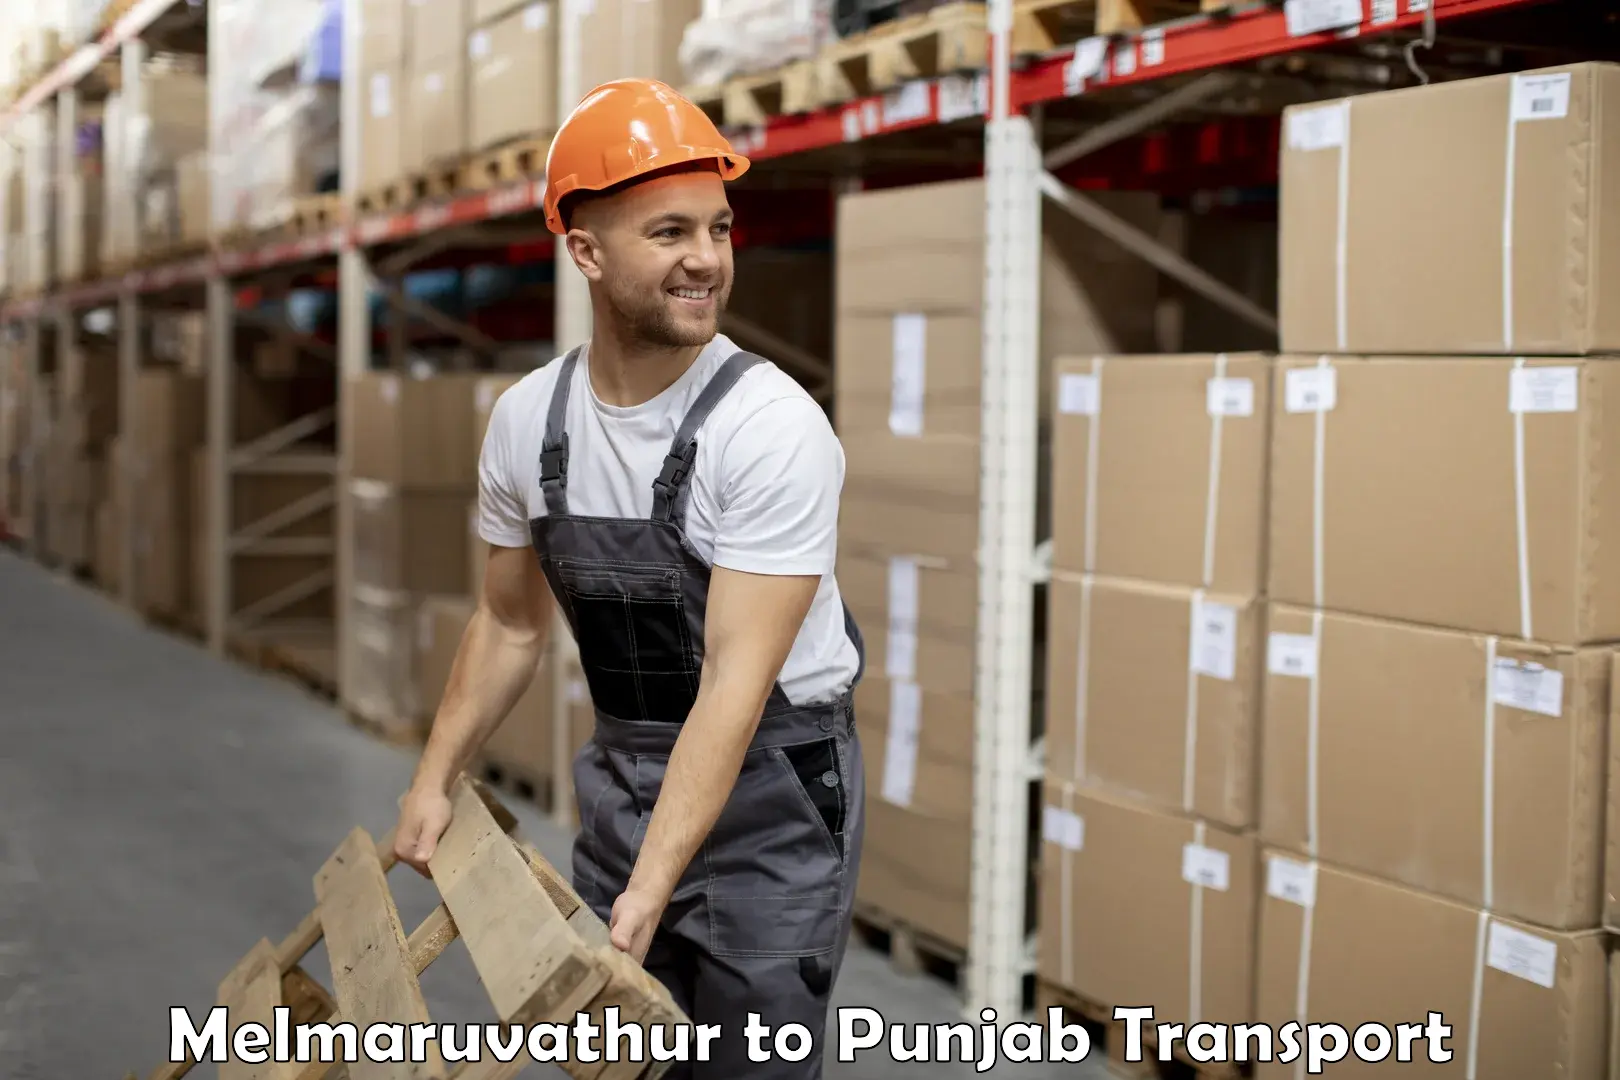 Nationwide transport services Melmaruvathur to Patiala